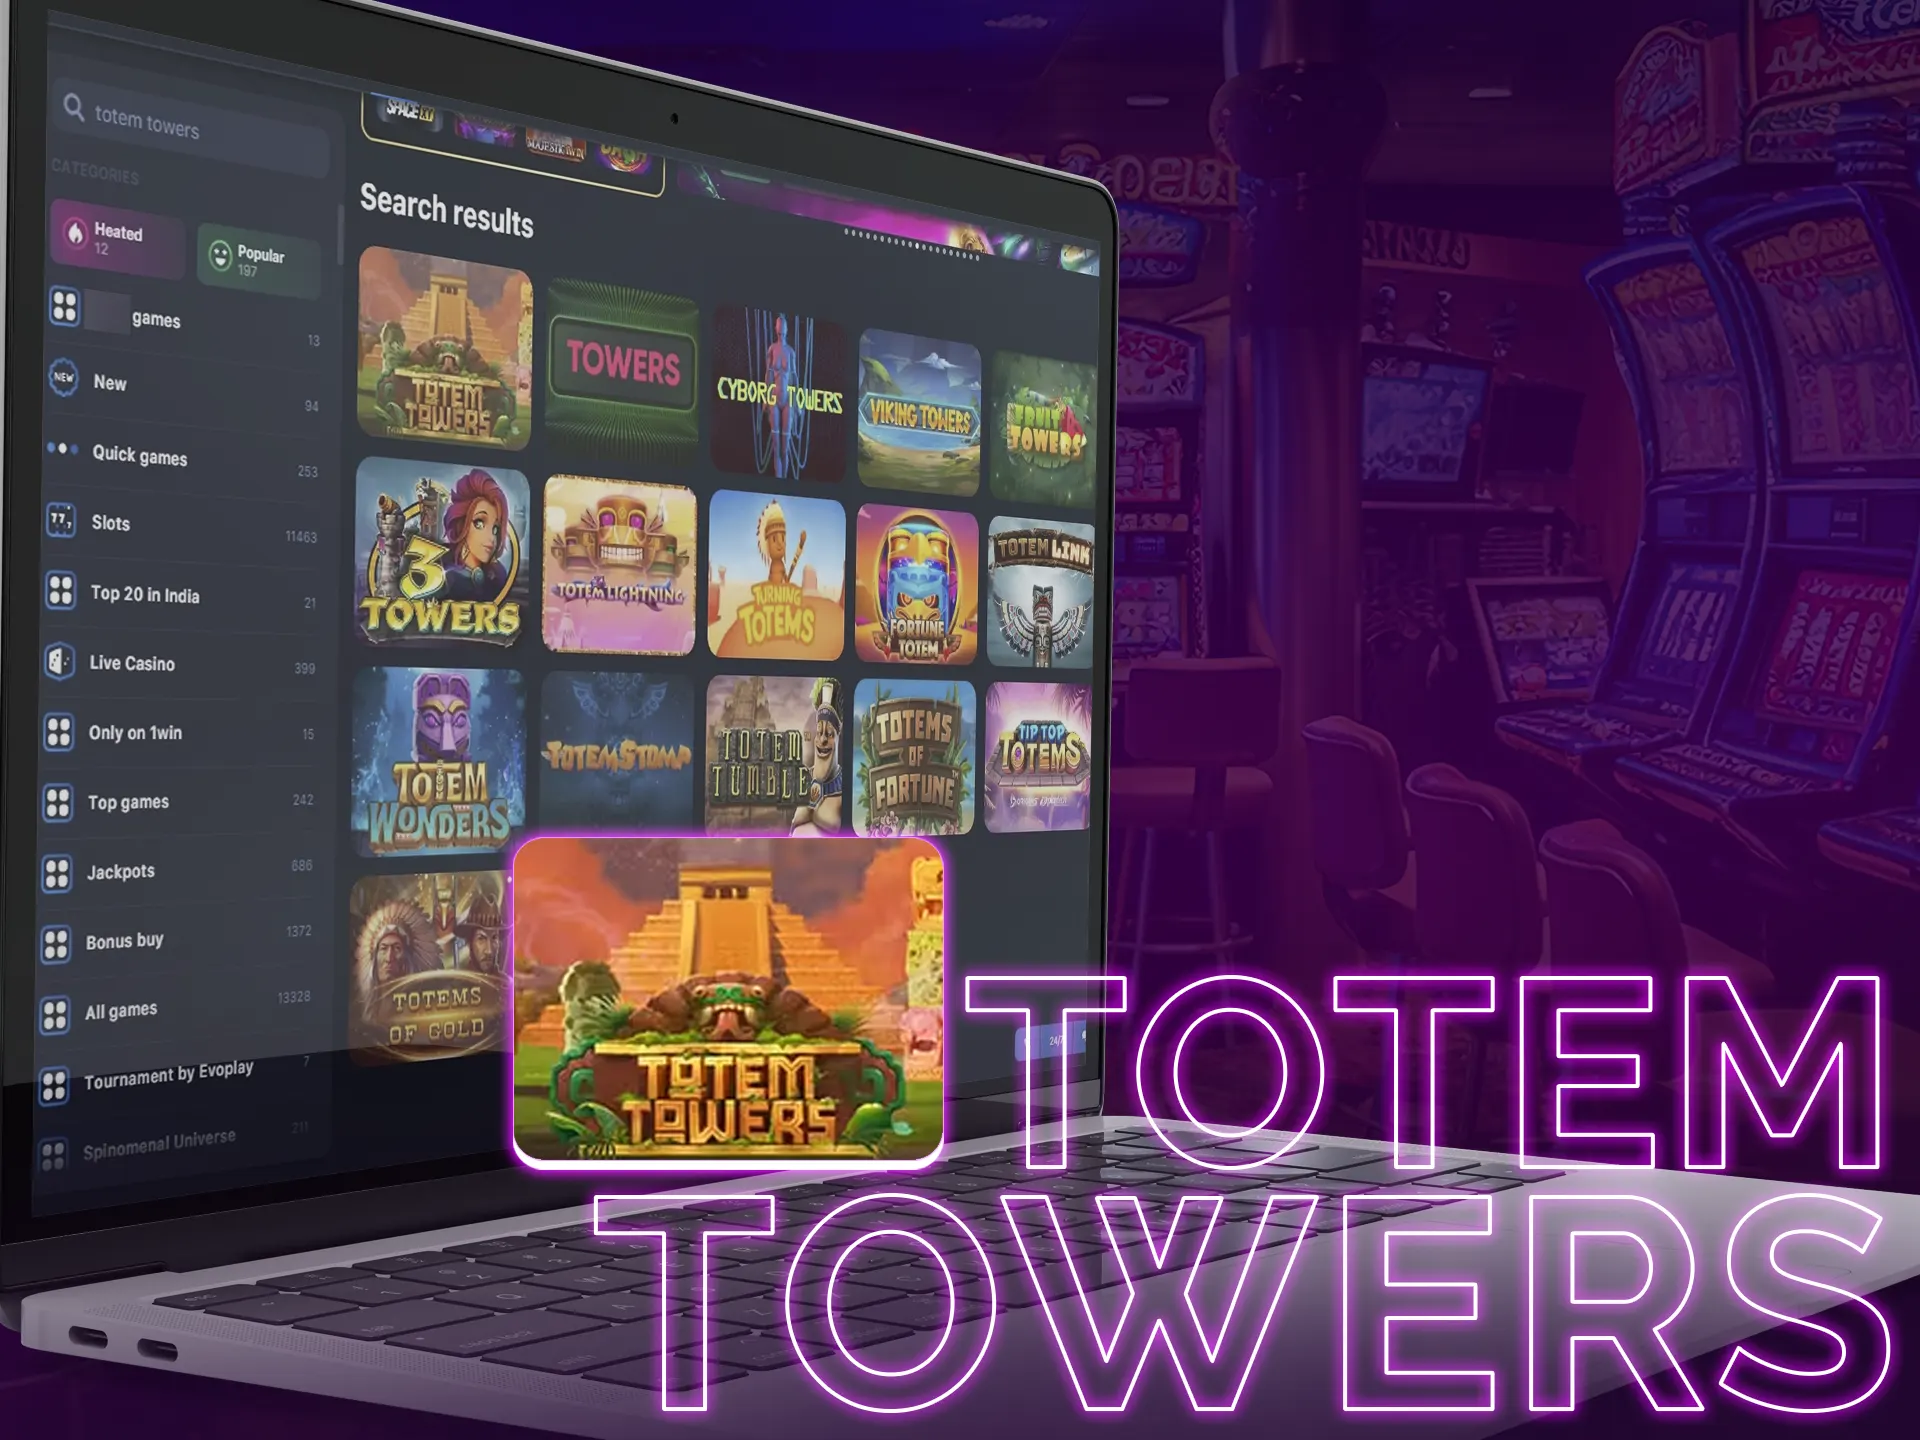 In the Totem Towers you find an ancient world Mayan vibe.